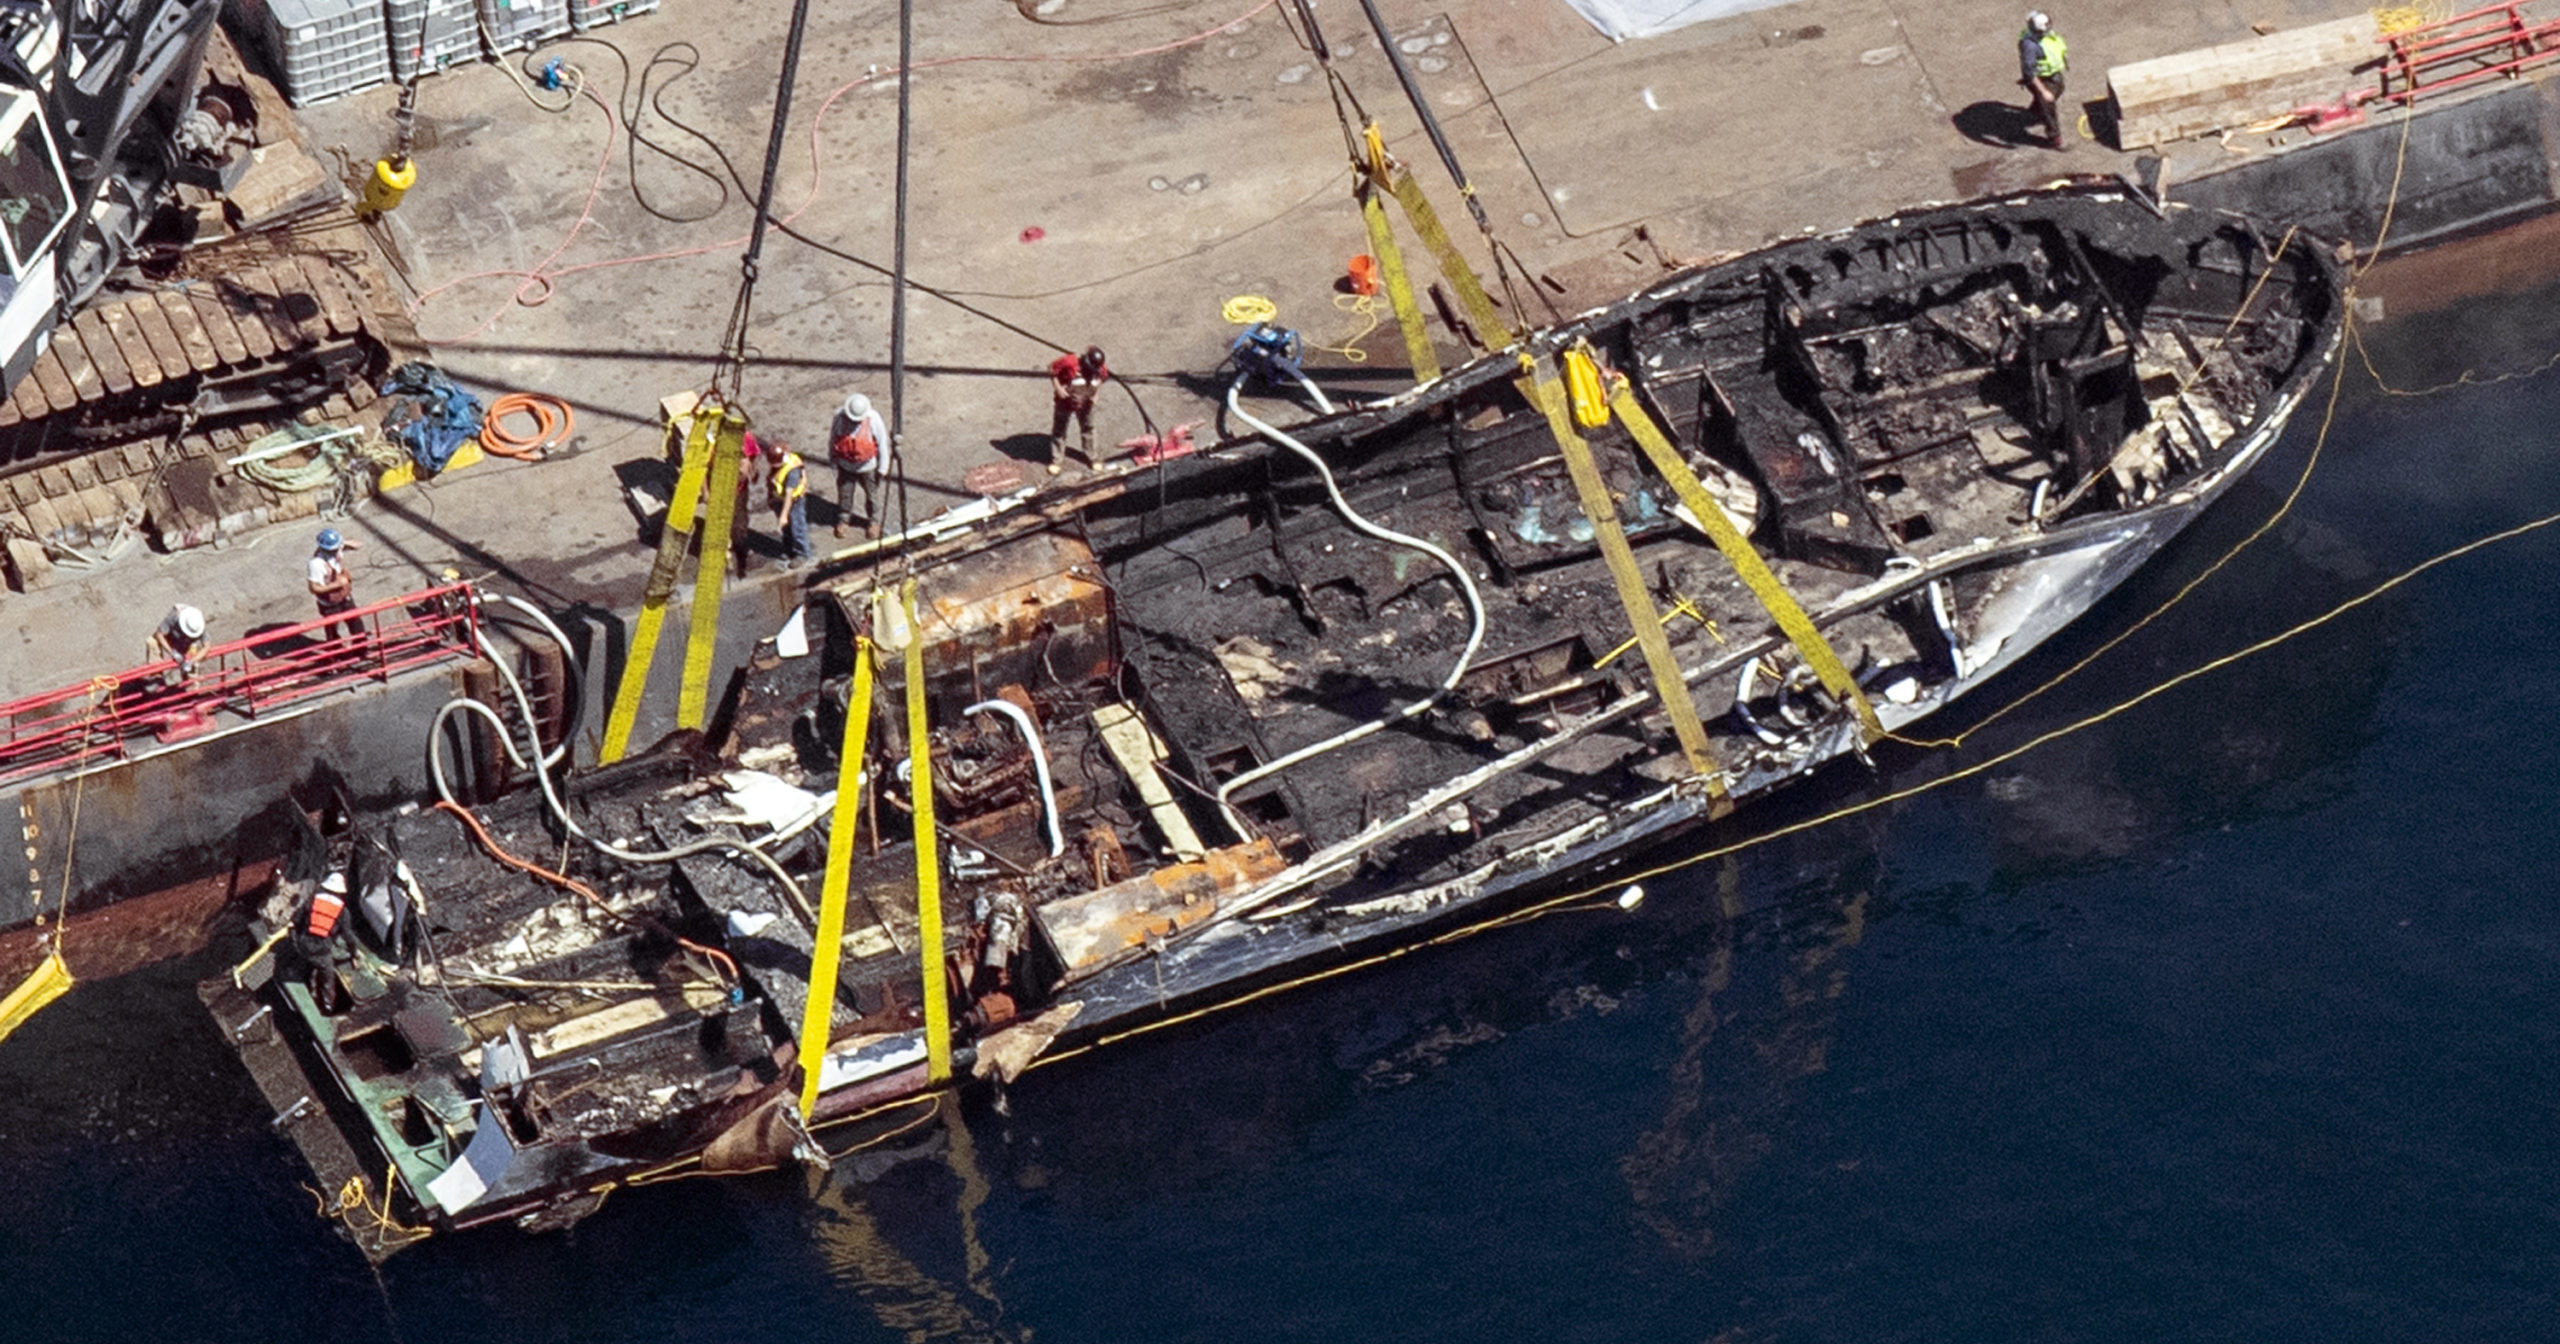 In this Sept. 12, 2019, file photo, the burned hull of the boat Conception is brought to the surface by a salvage team off Santa Cruz Island, California.